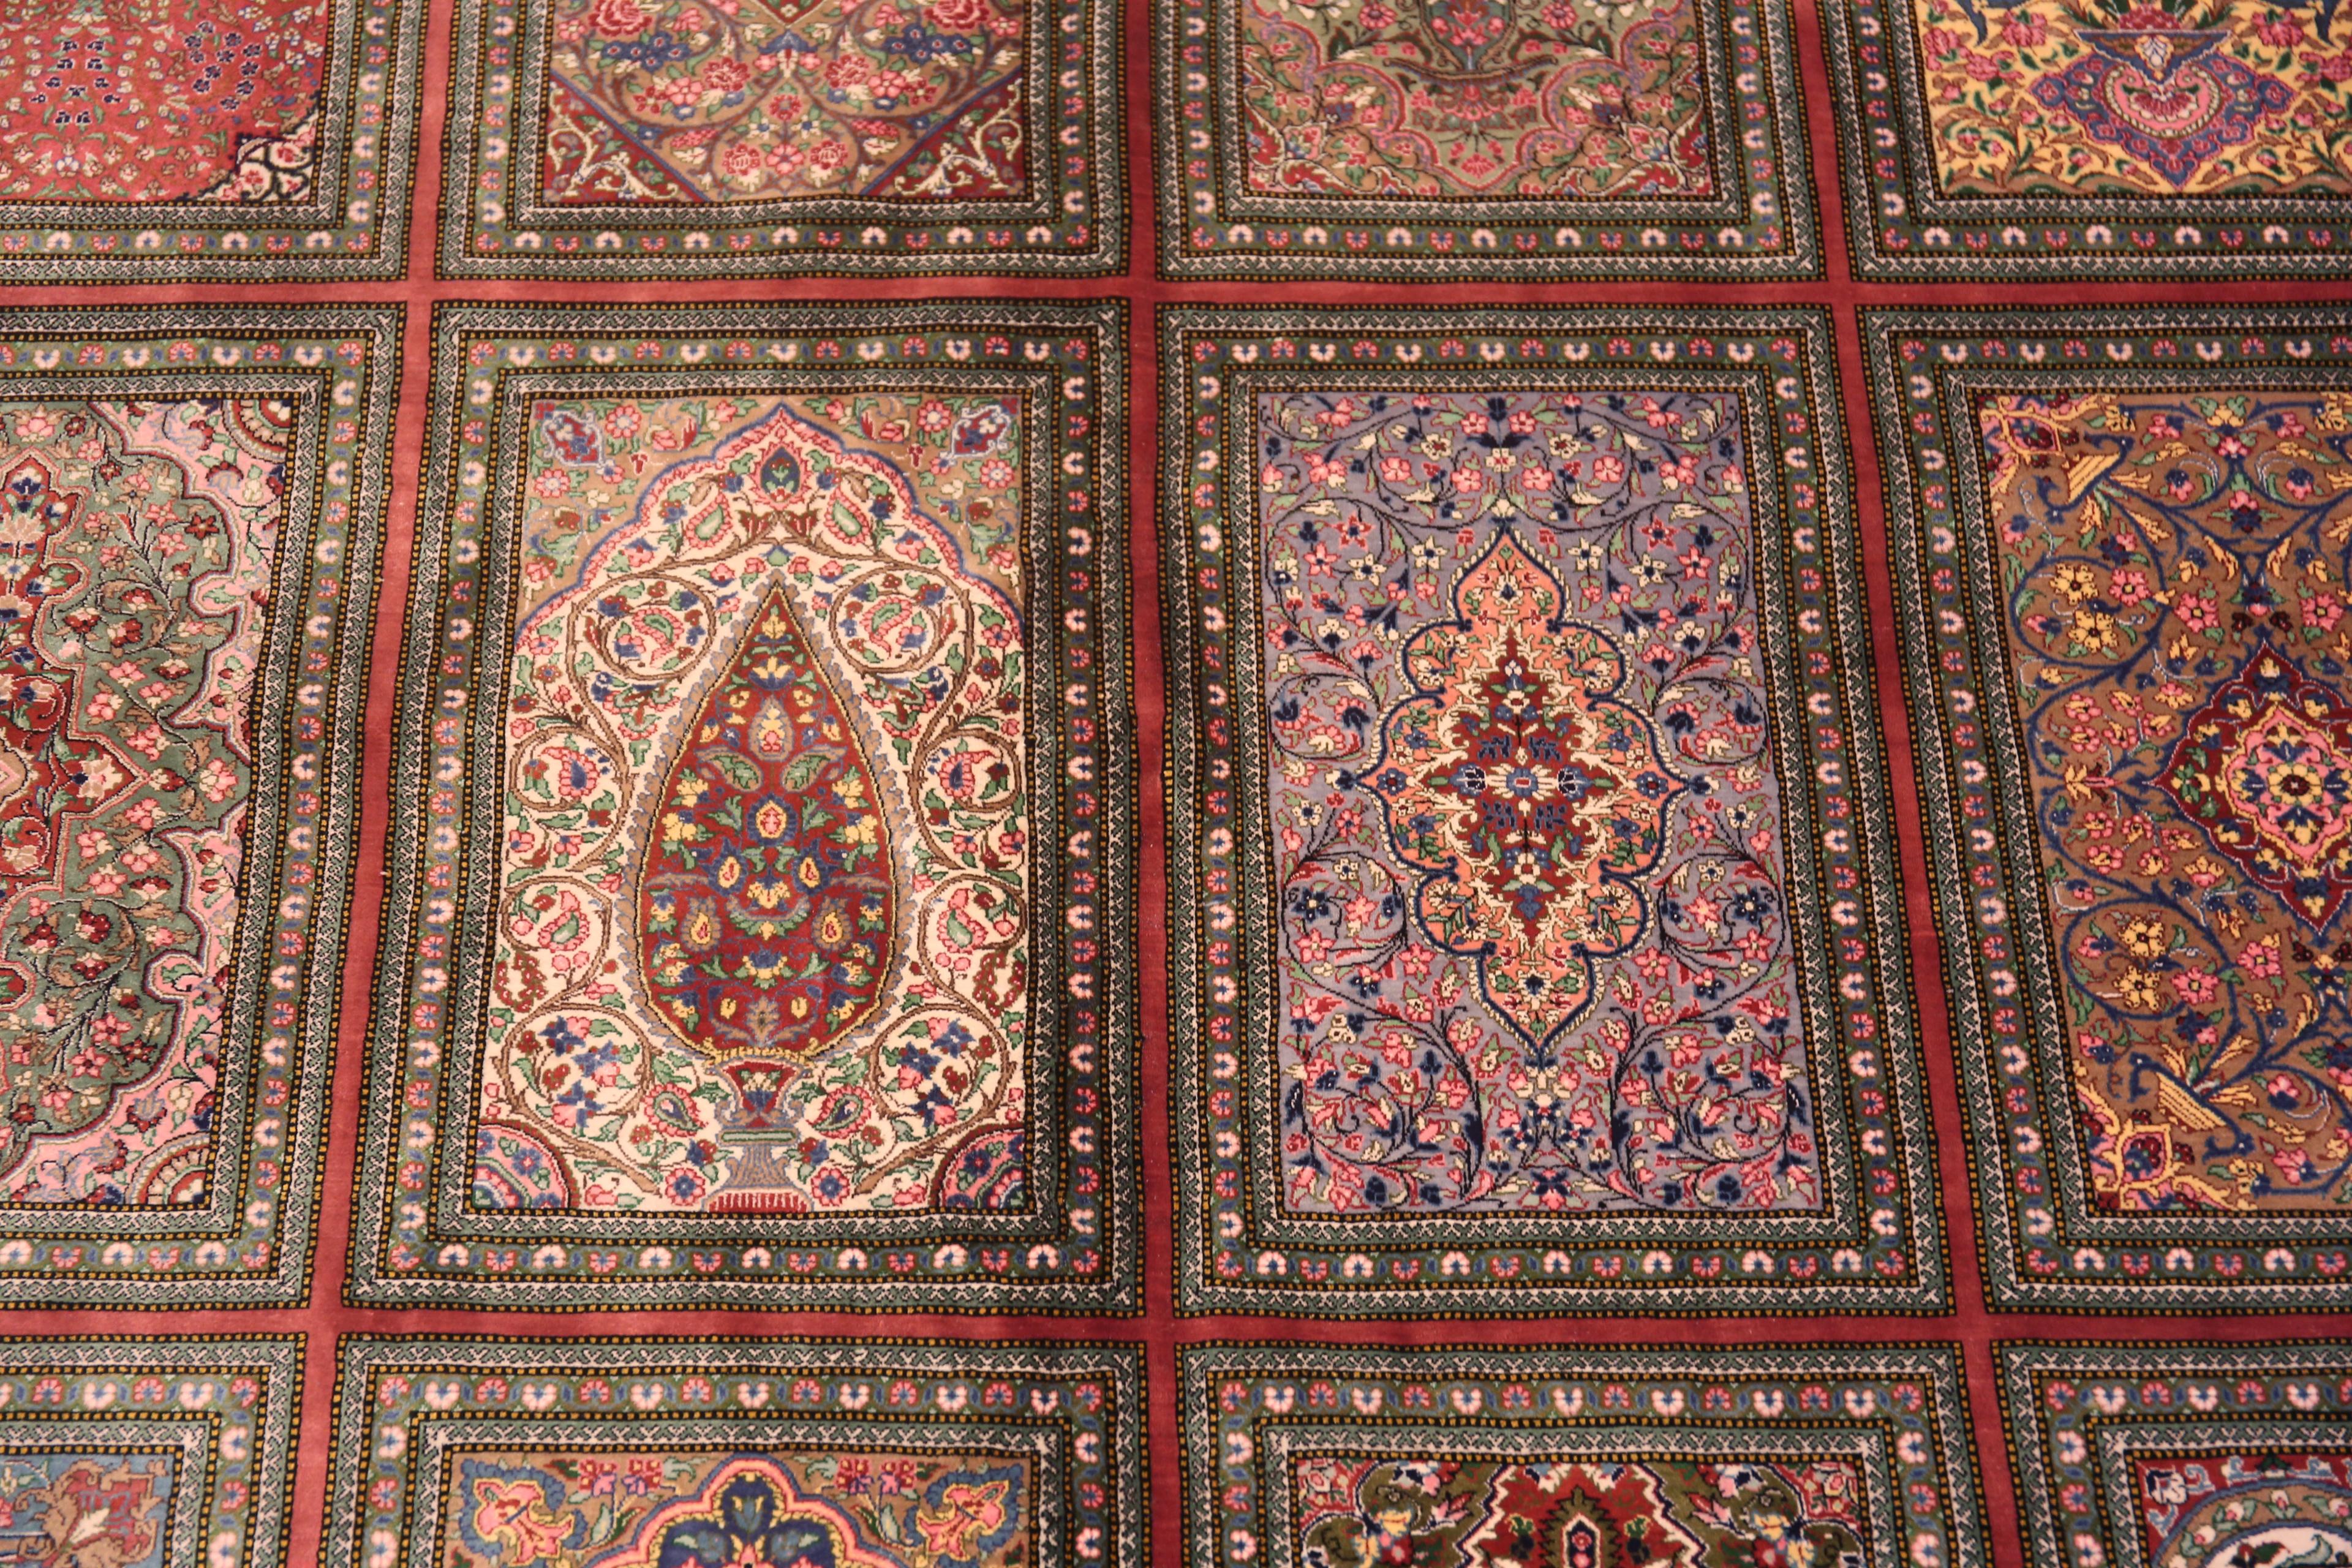 Hand-Knotted Beautiful Floral Gallery Size Vintage Luxury Persian Silk Qum Rug 5'2